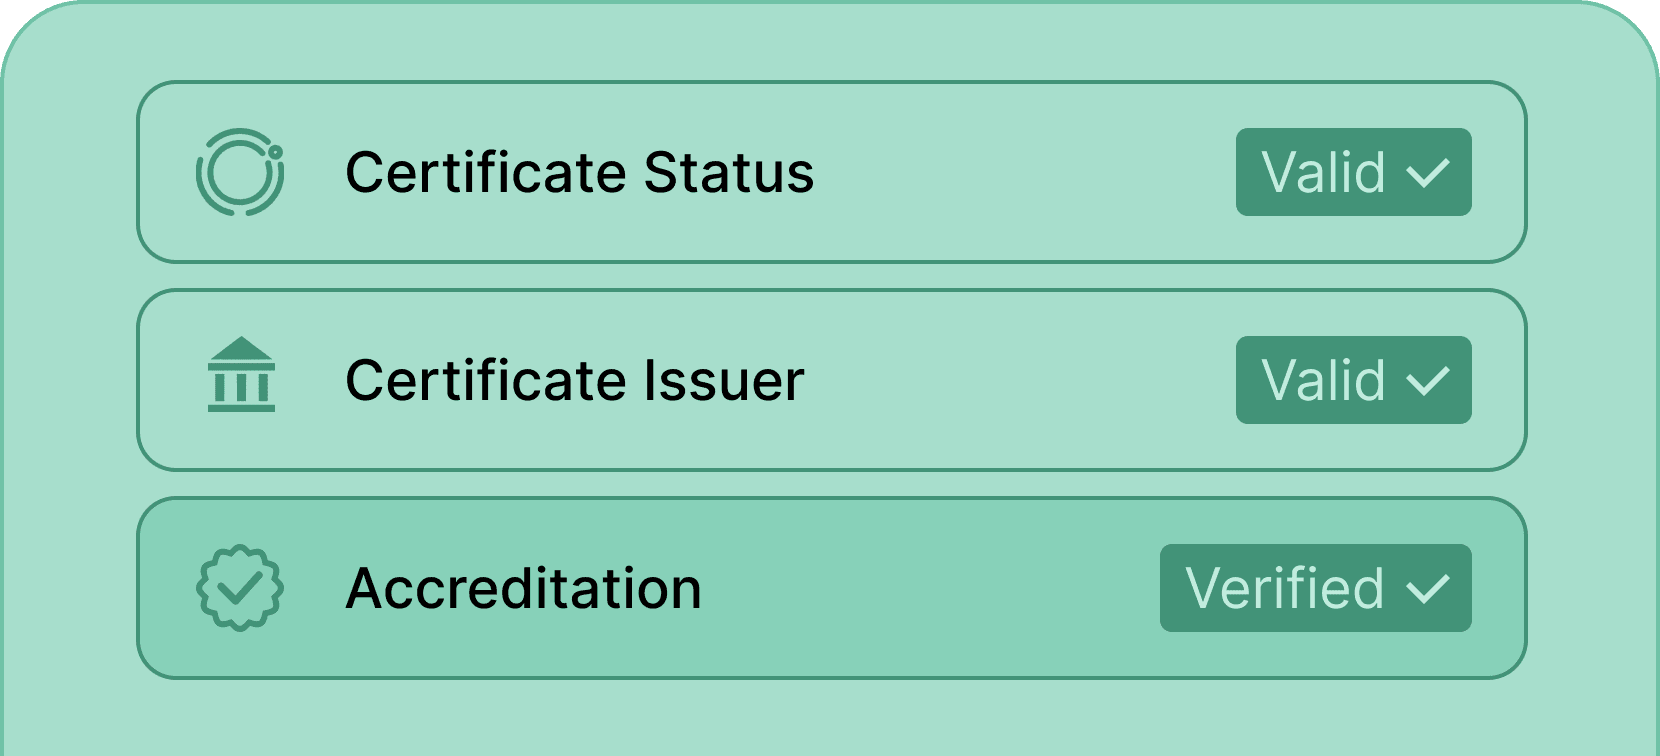 Verify credential issuer - Certifier features